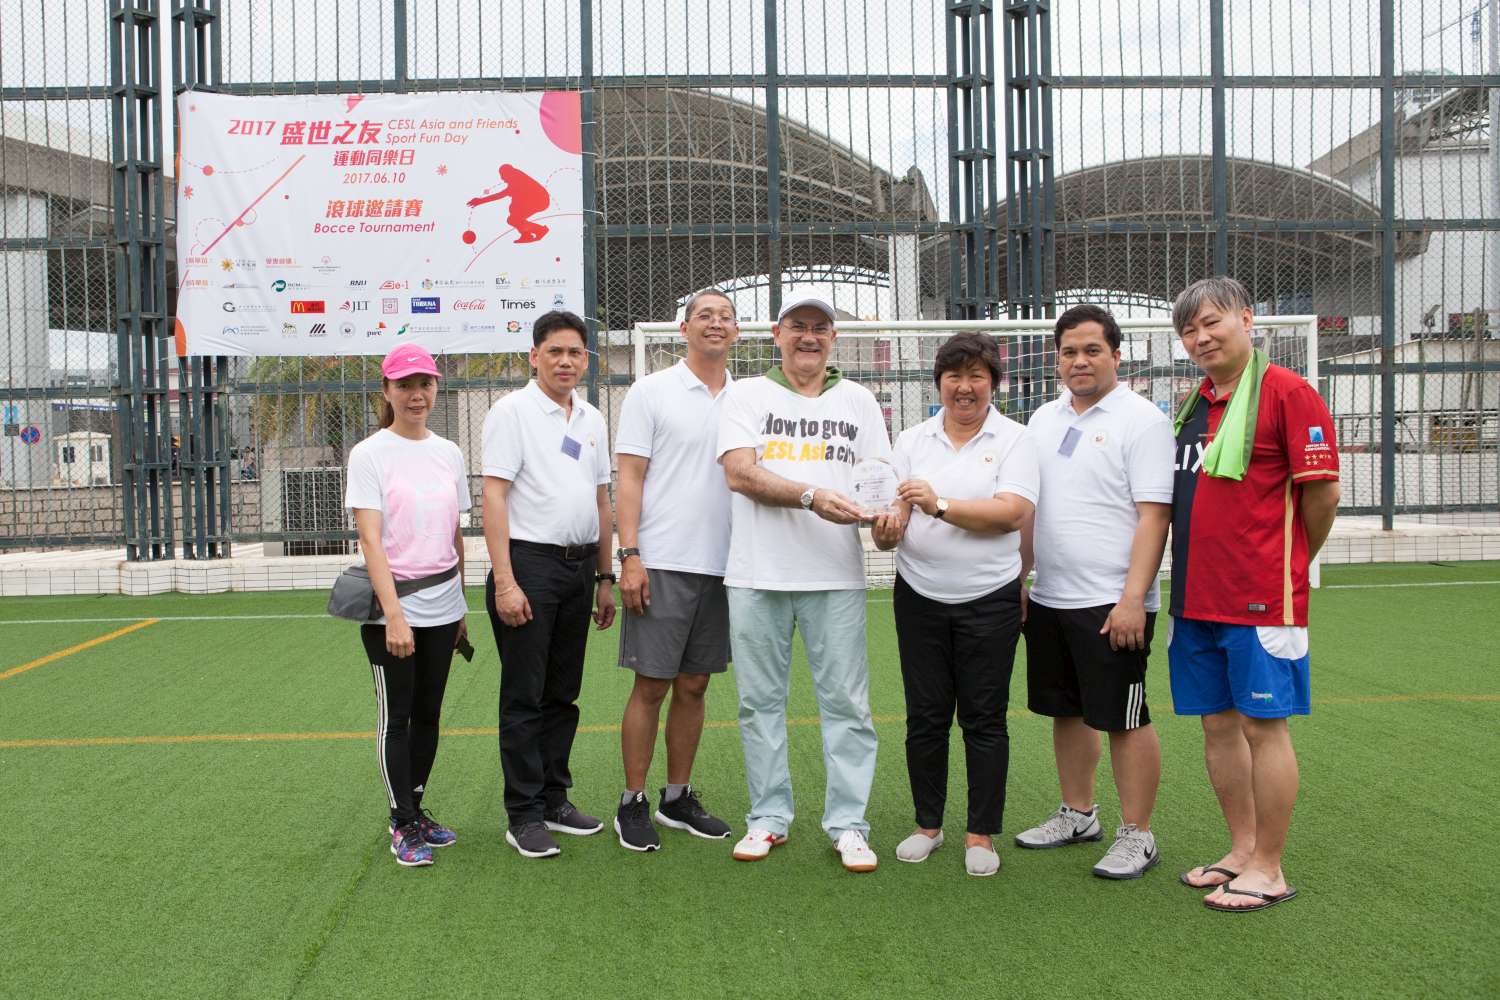 CESL Asia and Friends Strives for Social Integration at Sport Fun Day 2017